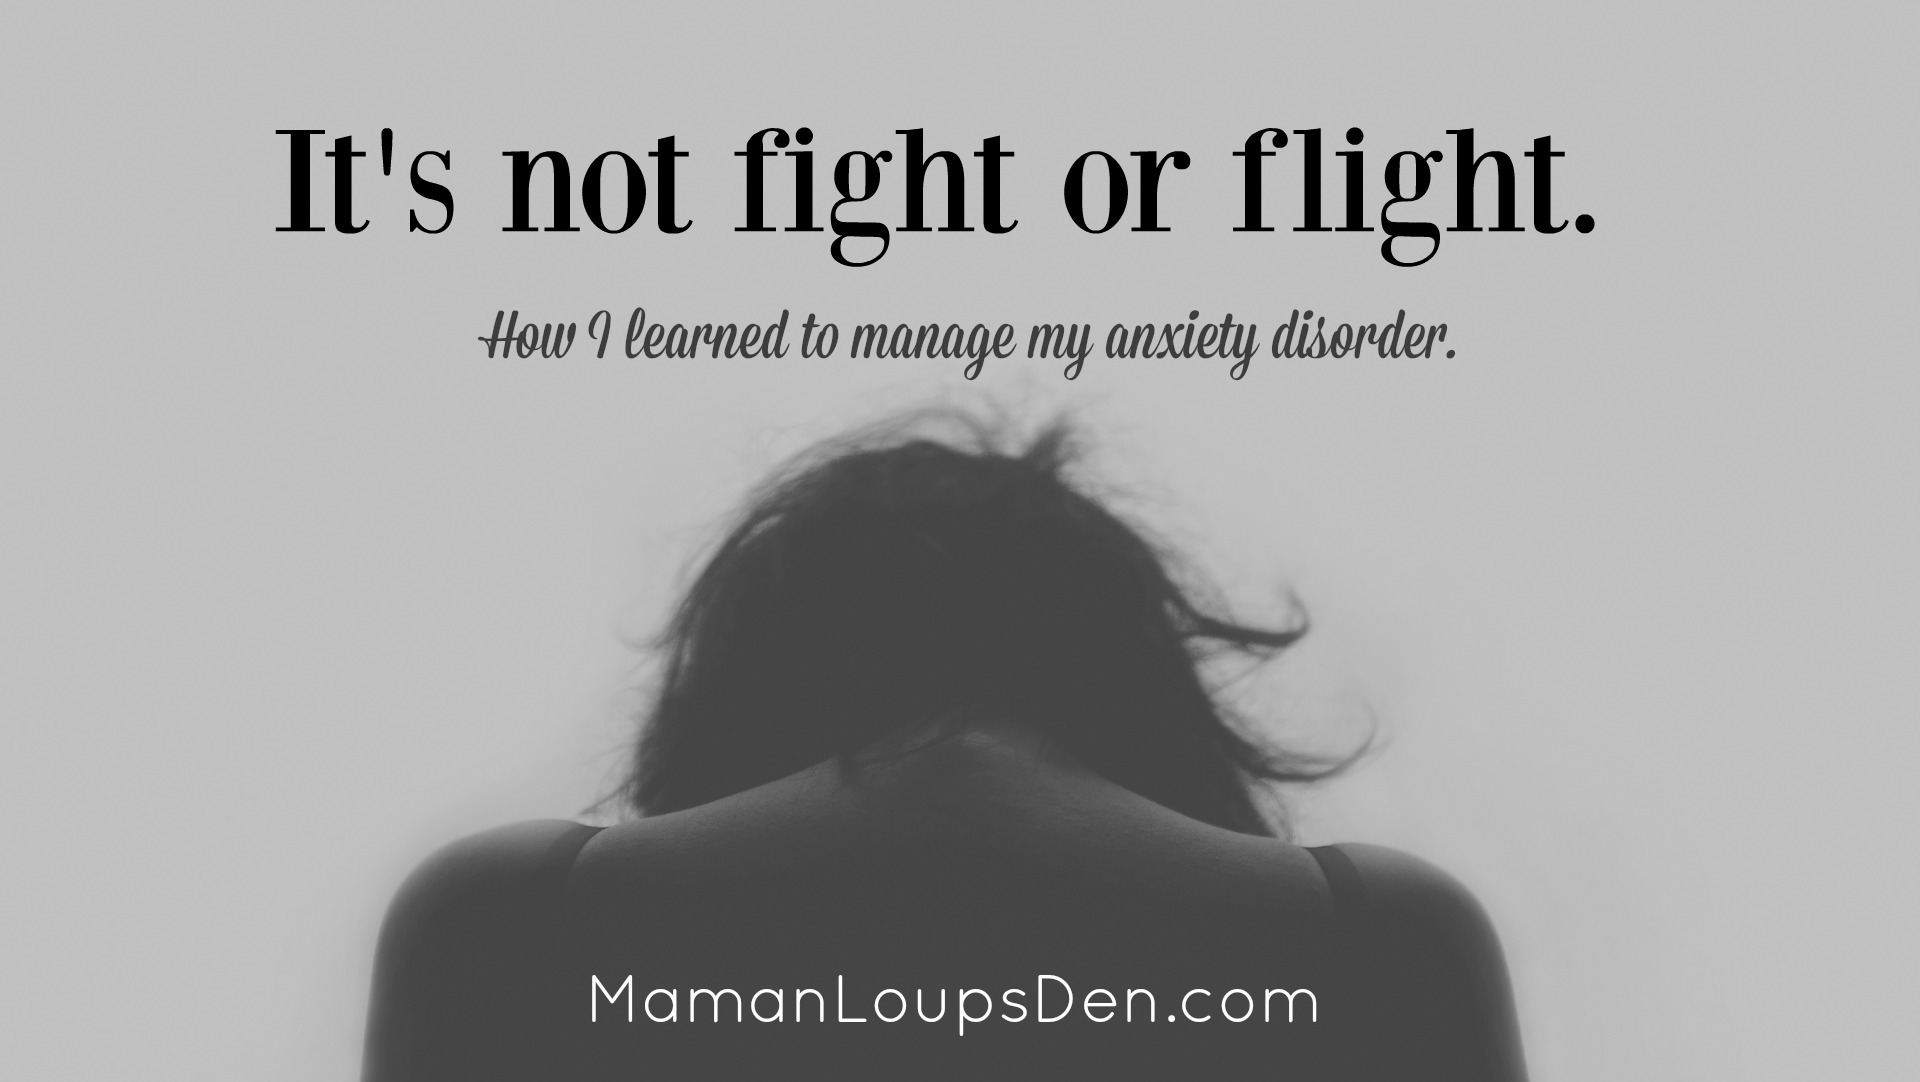 It’s not fight or flight: How I learned to manage my anxiety disorder.